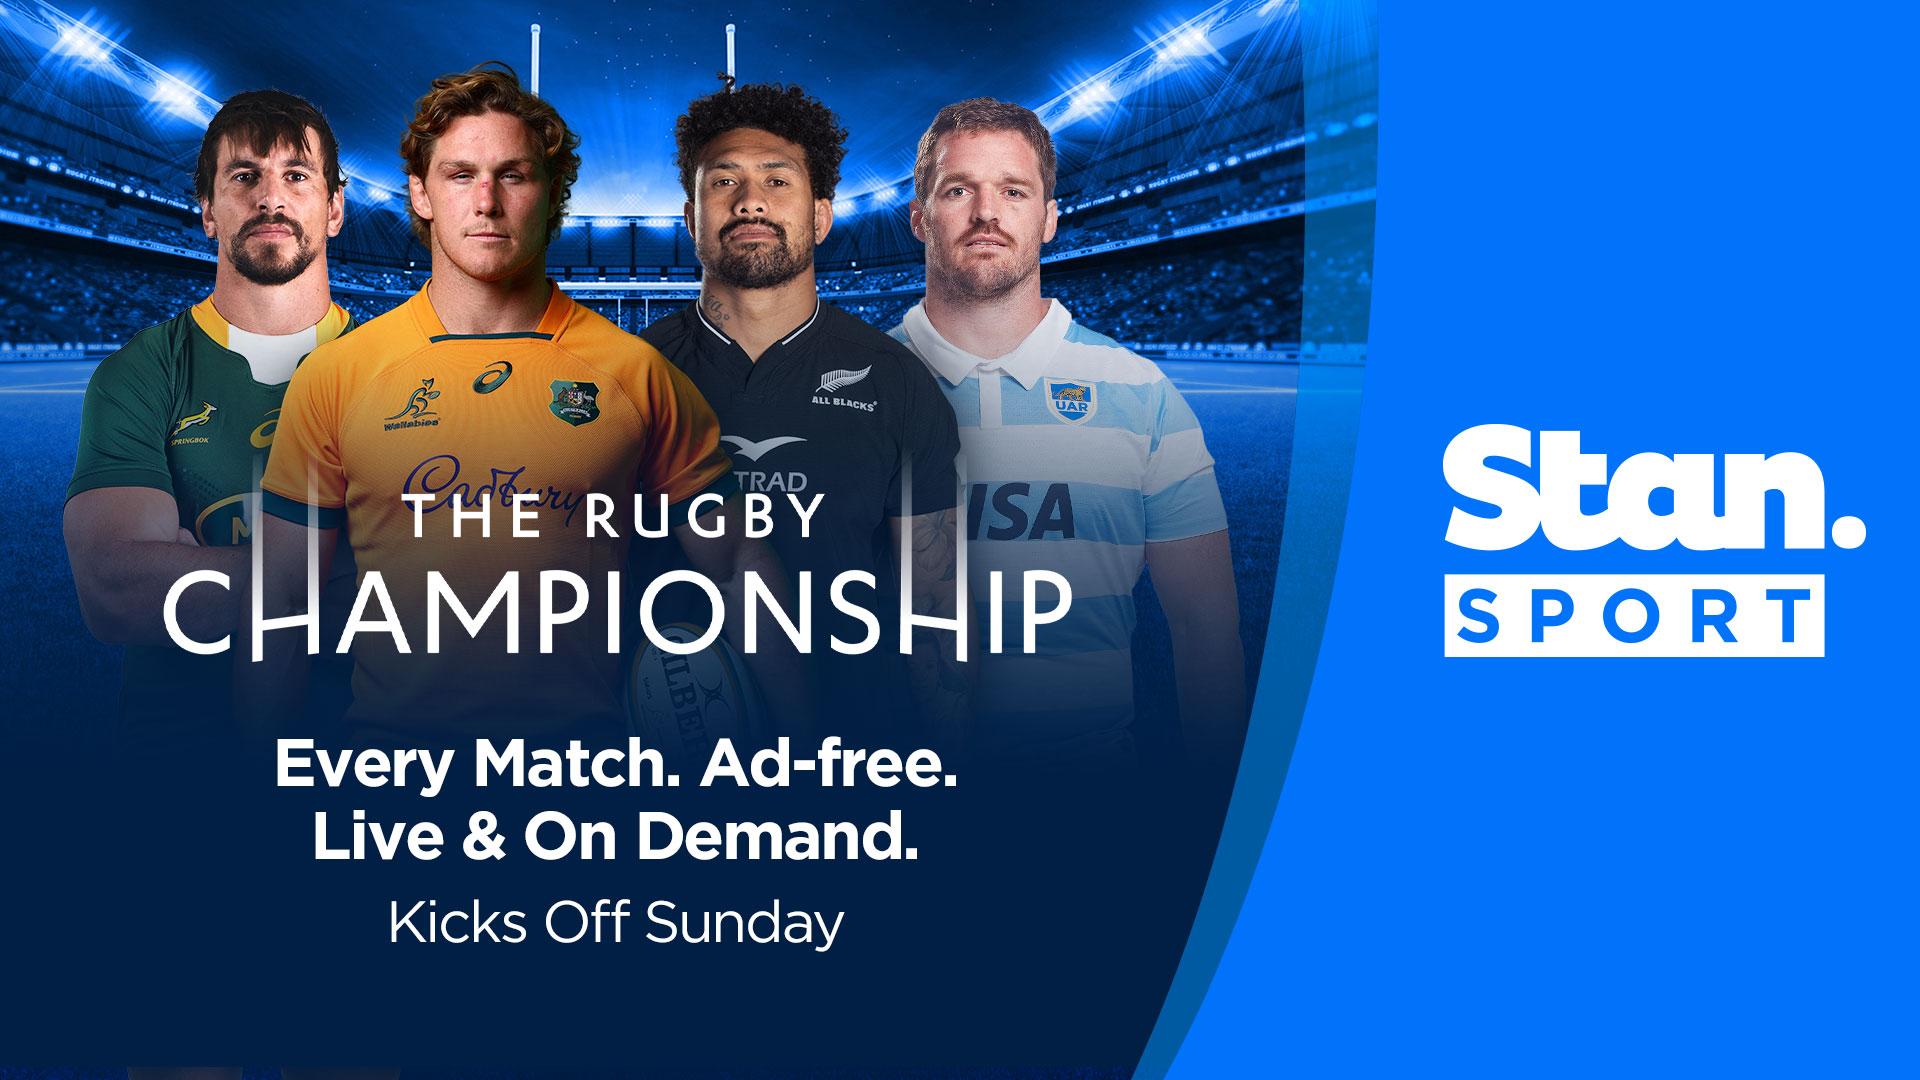 WALLABIES CLASH WITH SOUTHERN HEMISPHERE RIVALS AS THE RUGBY CHAMPIONSHIP AND BLEDISLOE CUP KICK OFF